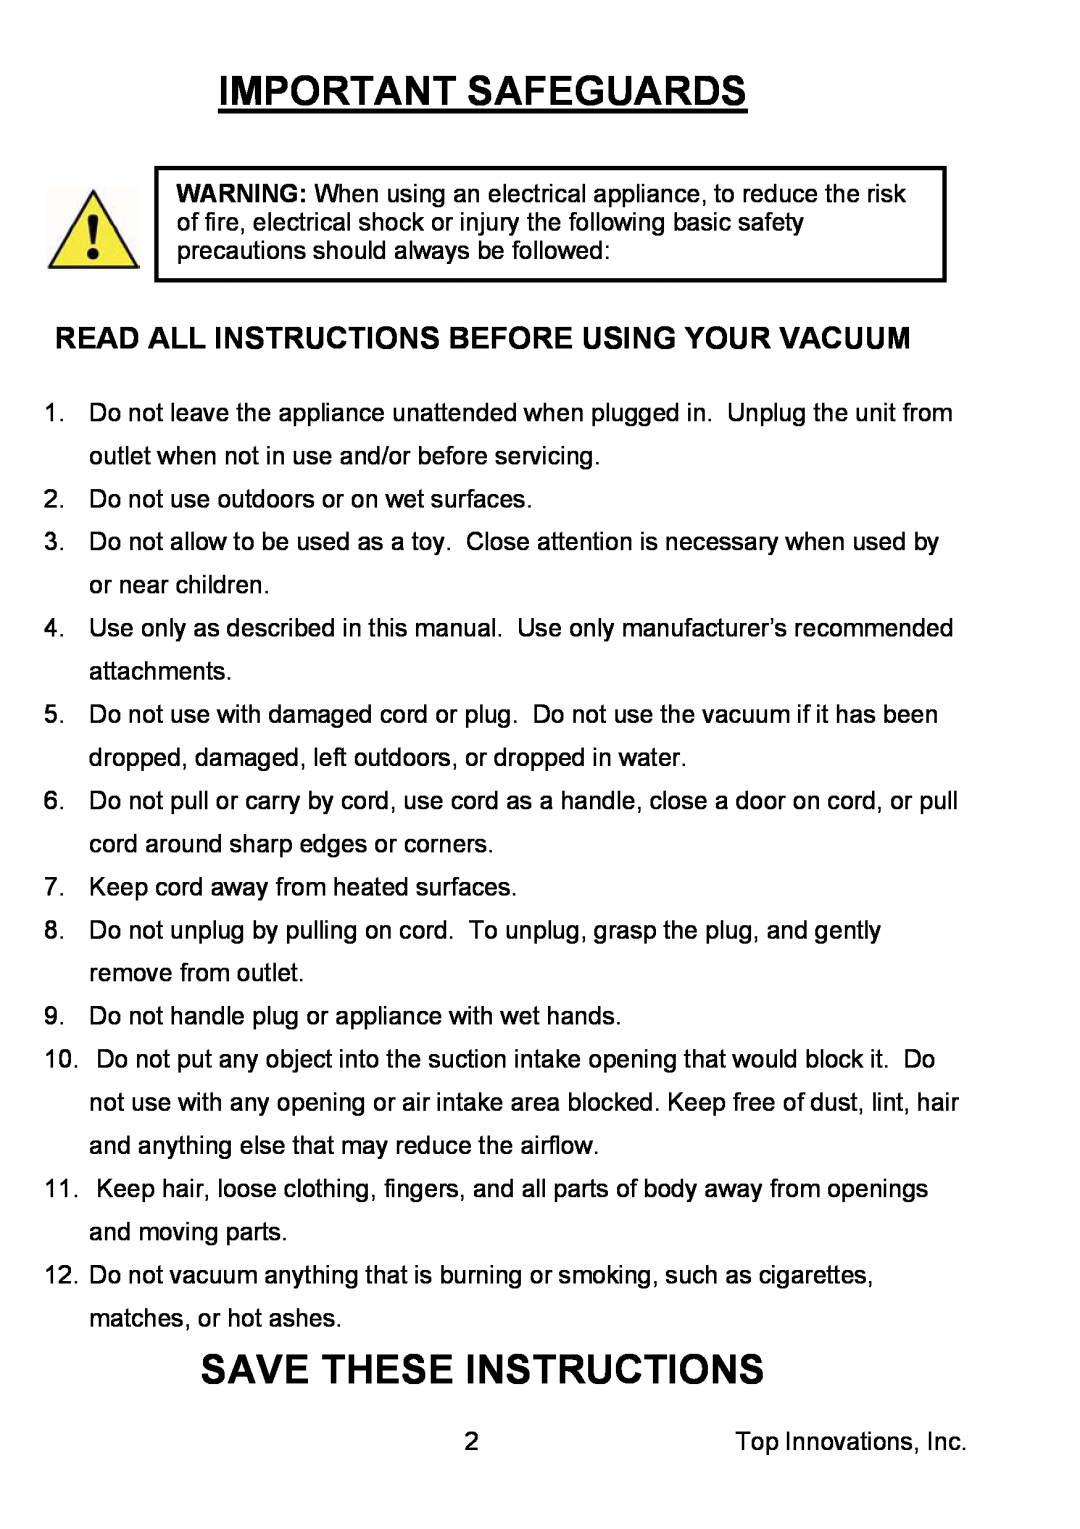 Top Innovations MC1910 Important Safeguards, Save These Instructions, Read All Instructions Before Using Your Vacuum 